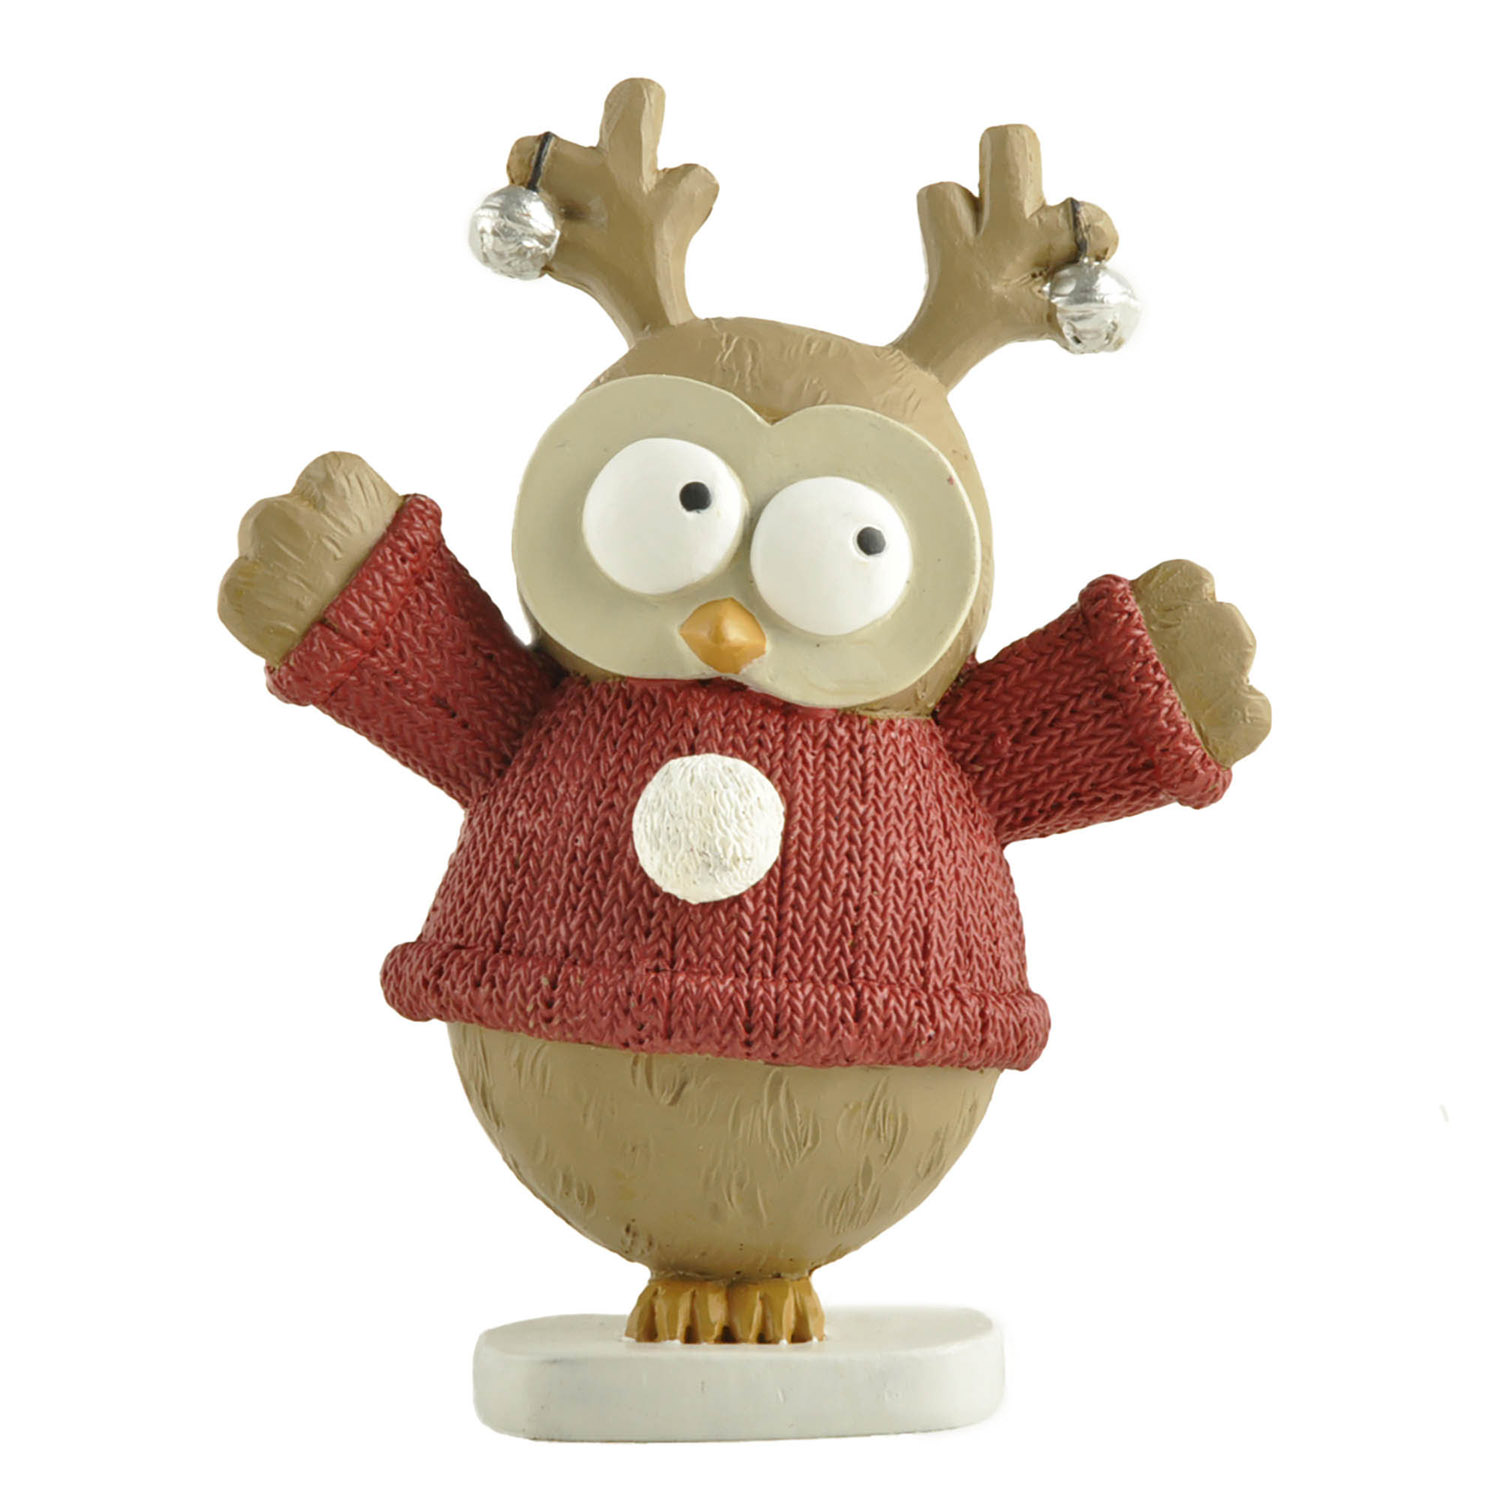 Cute Resin Owl Figurine with Reindeer Antlers and Jingle Bells– Festive Christmas Decoration for Home and Office 238-13898